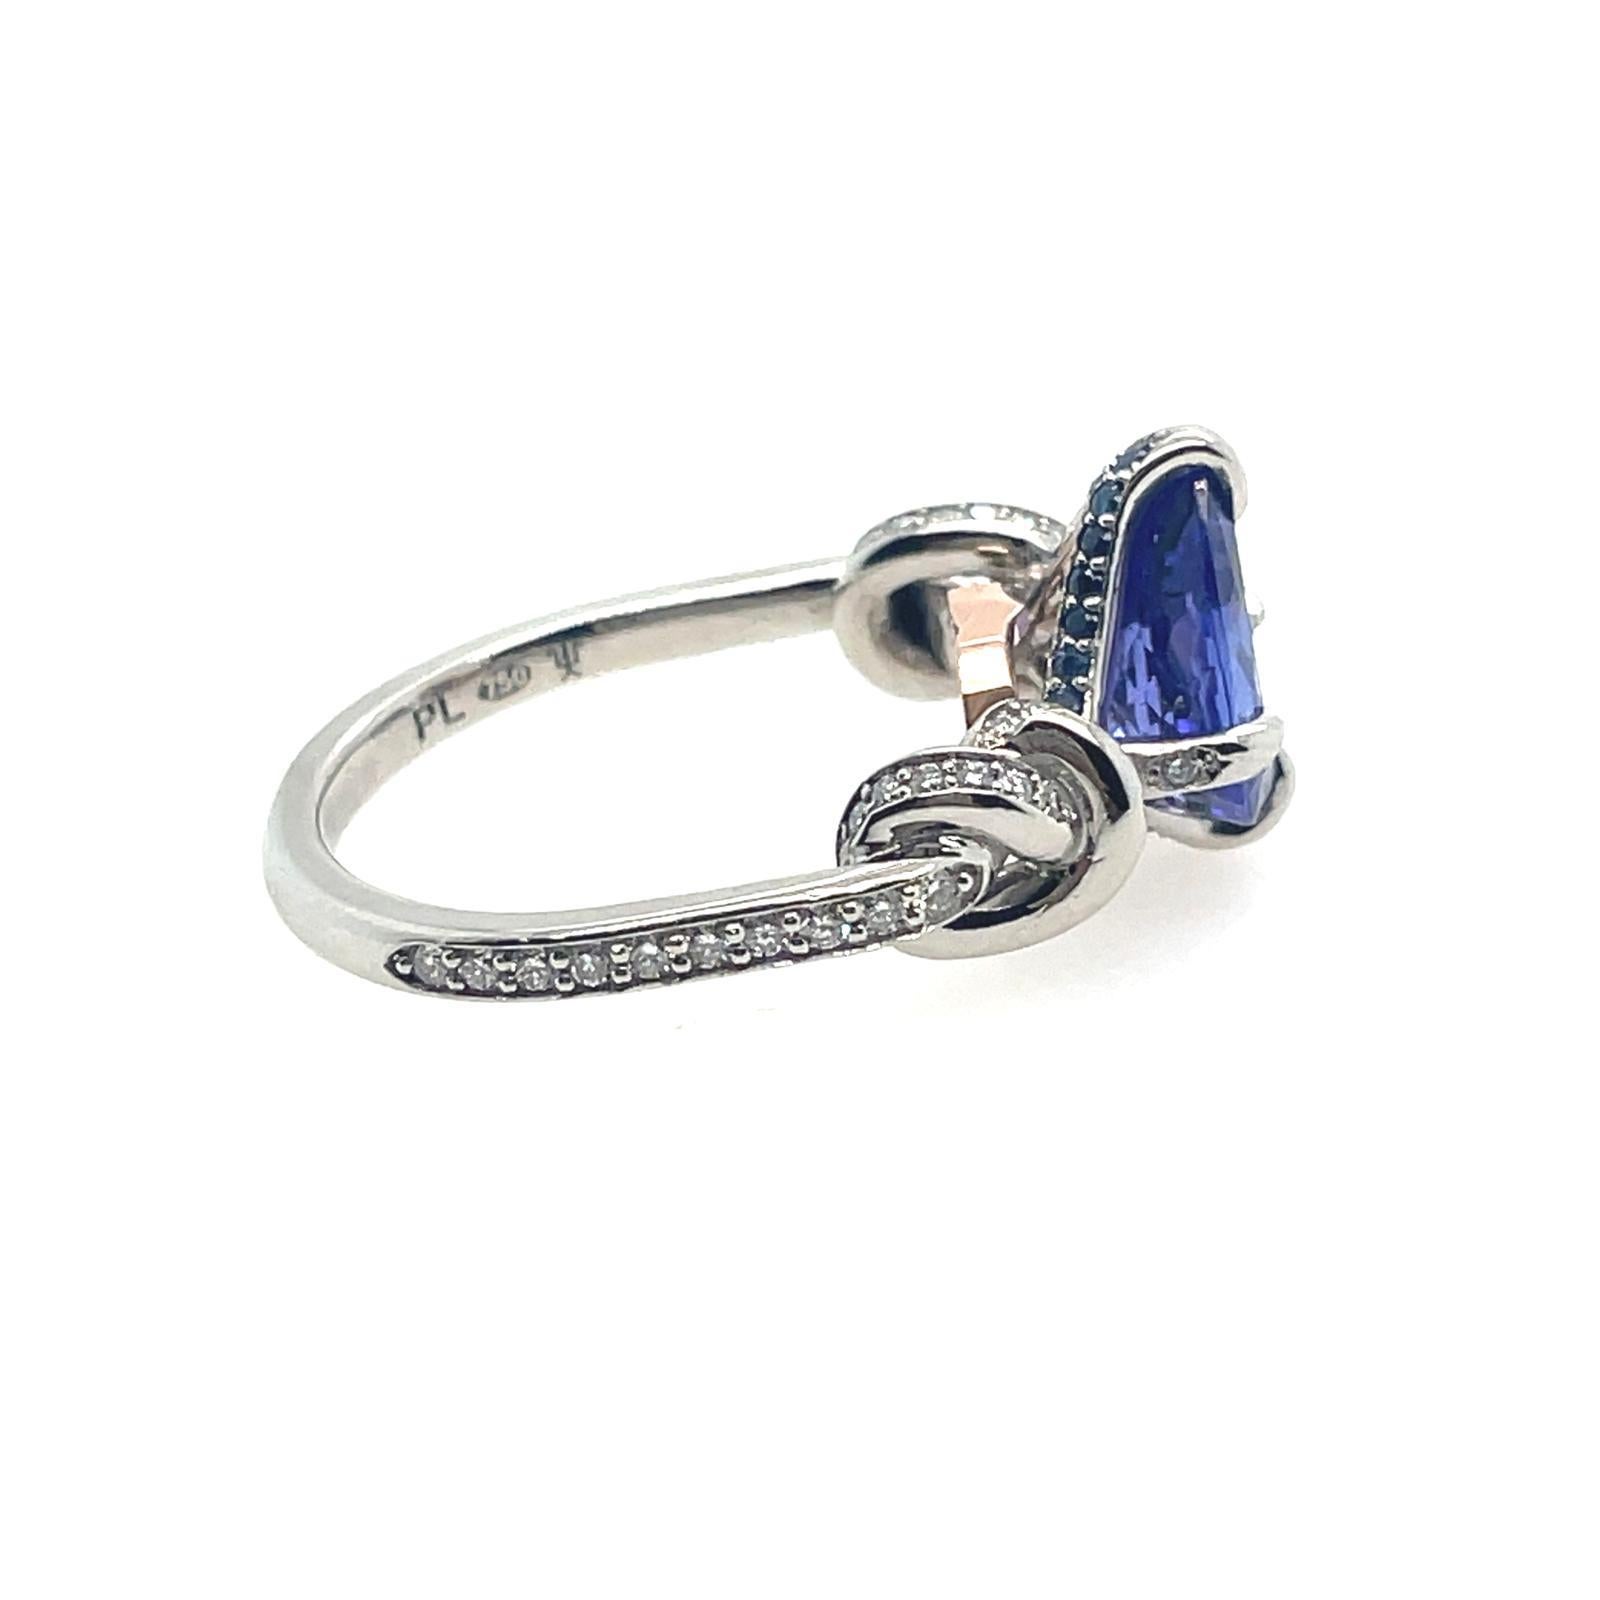 For Sale:  2ct tanzanite and diamond ring in platinum and rose gold  Forget me knot ring  3